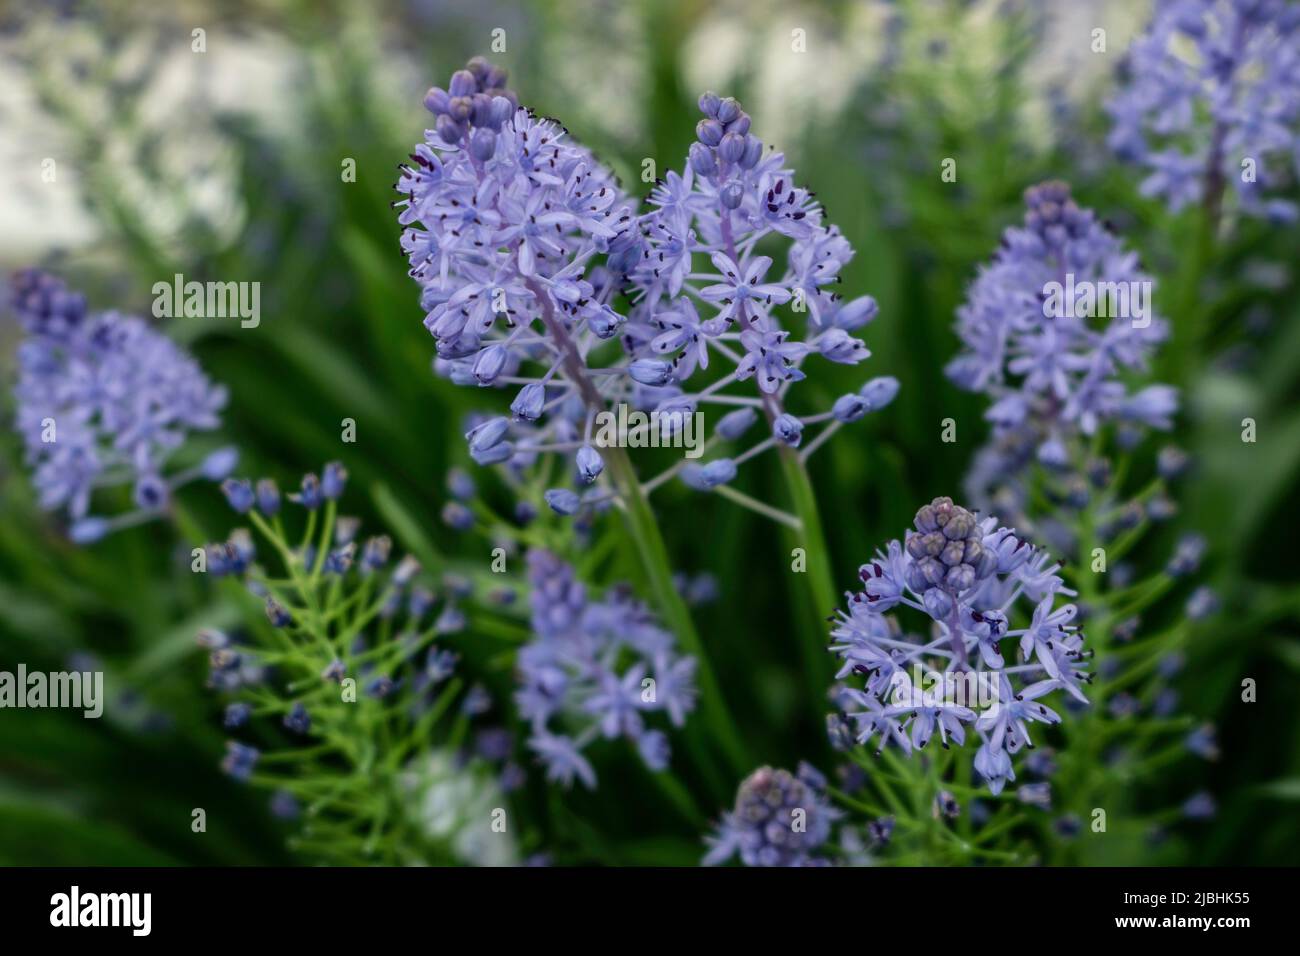 The blue flowers of  Scilla bithynica, in full bloom. Stock Photo